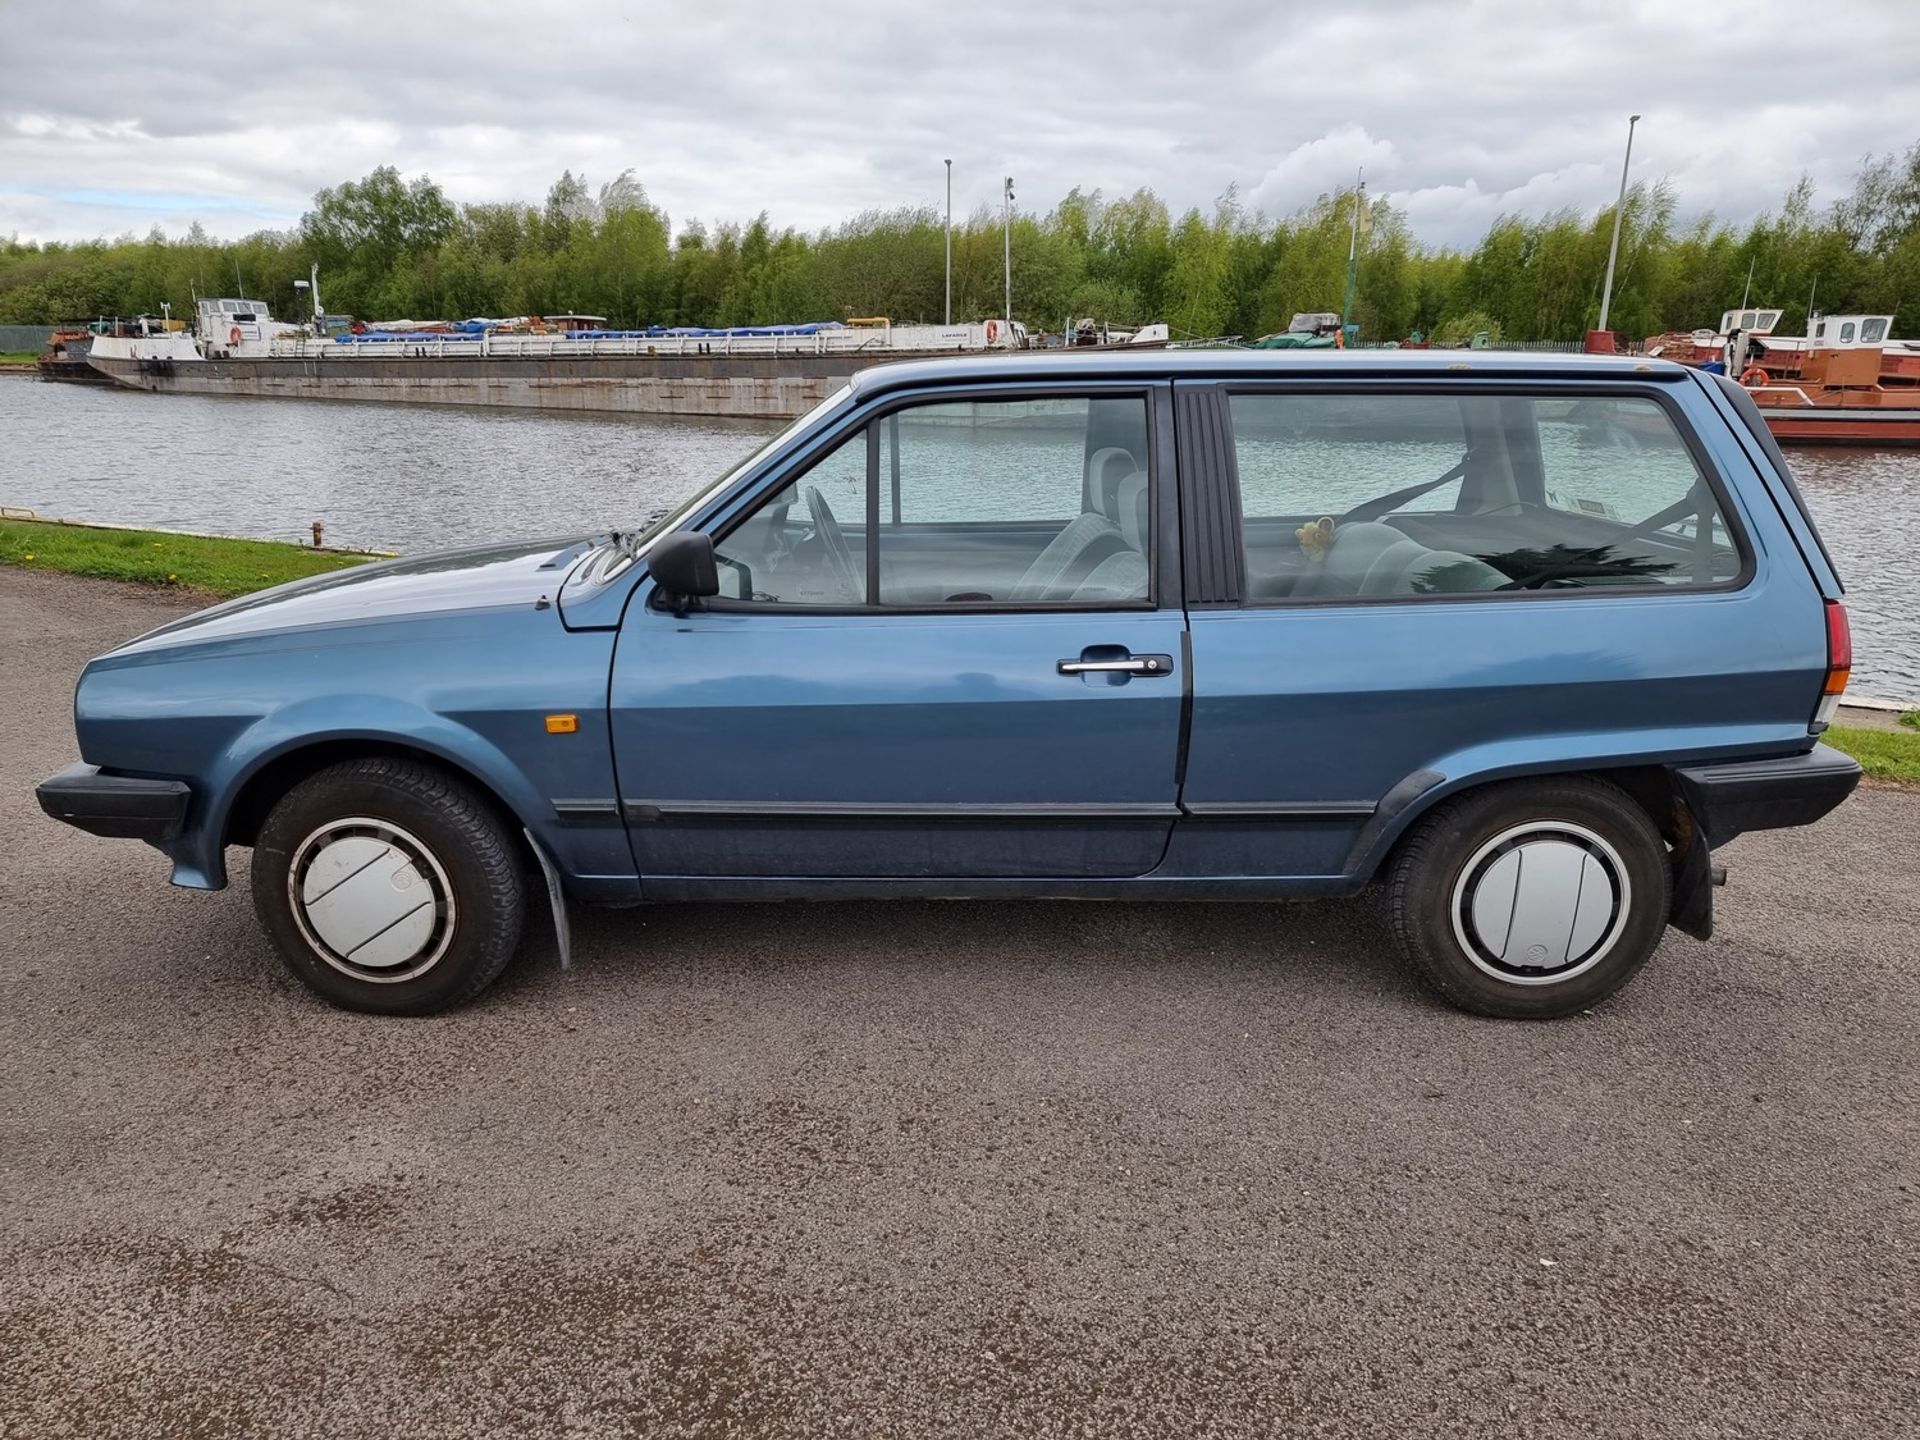 1989 VW Polo Mk2, 1272cc. Registration number G775 MKH. Chassis number WVWZZZ80ZKW168973. Engine - Image 8 of 16